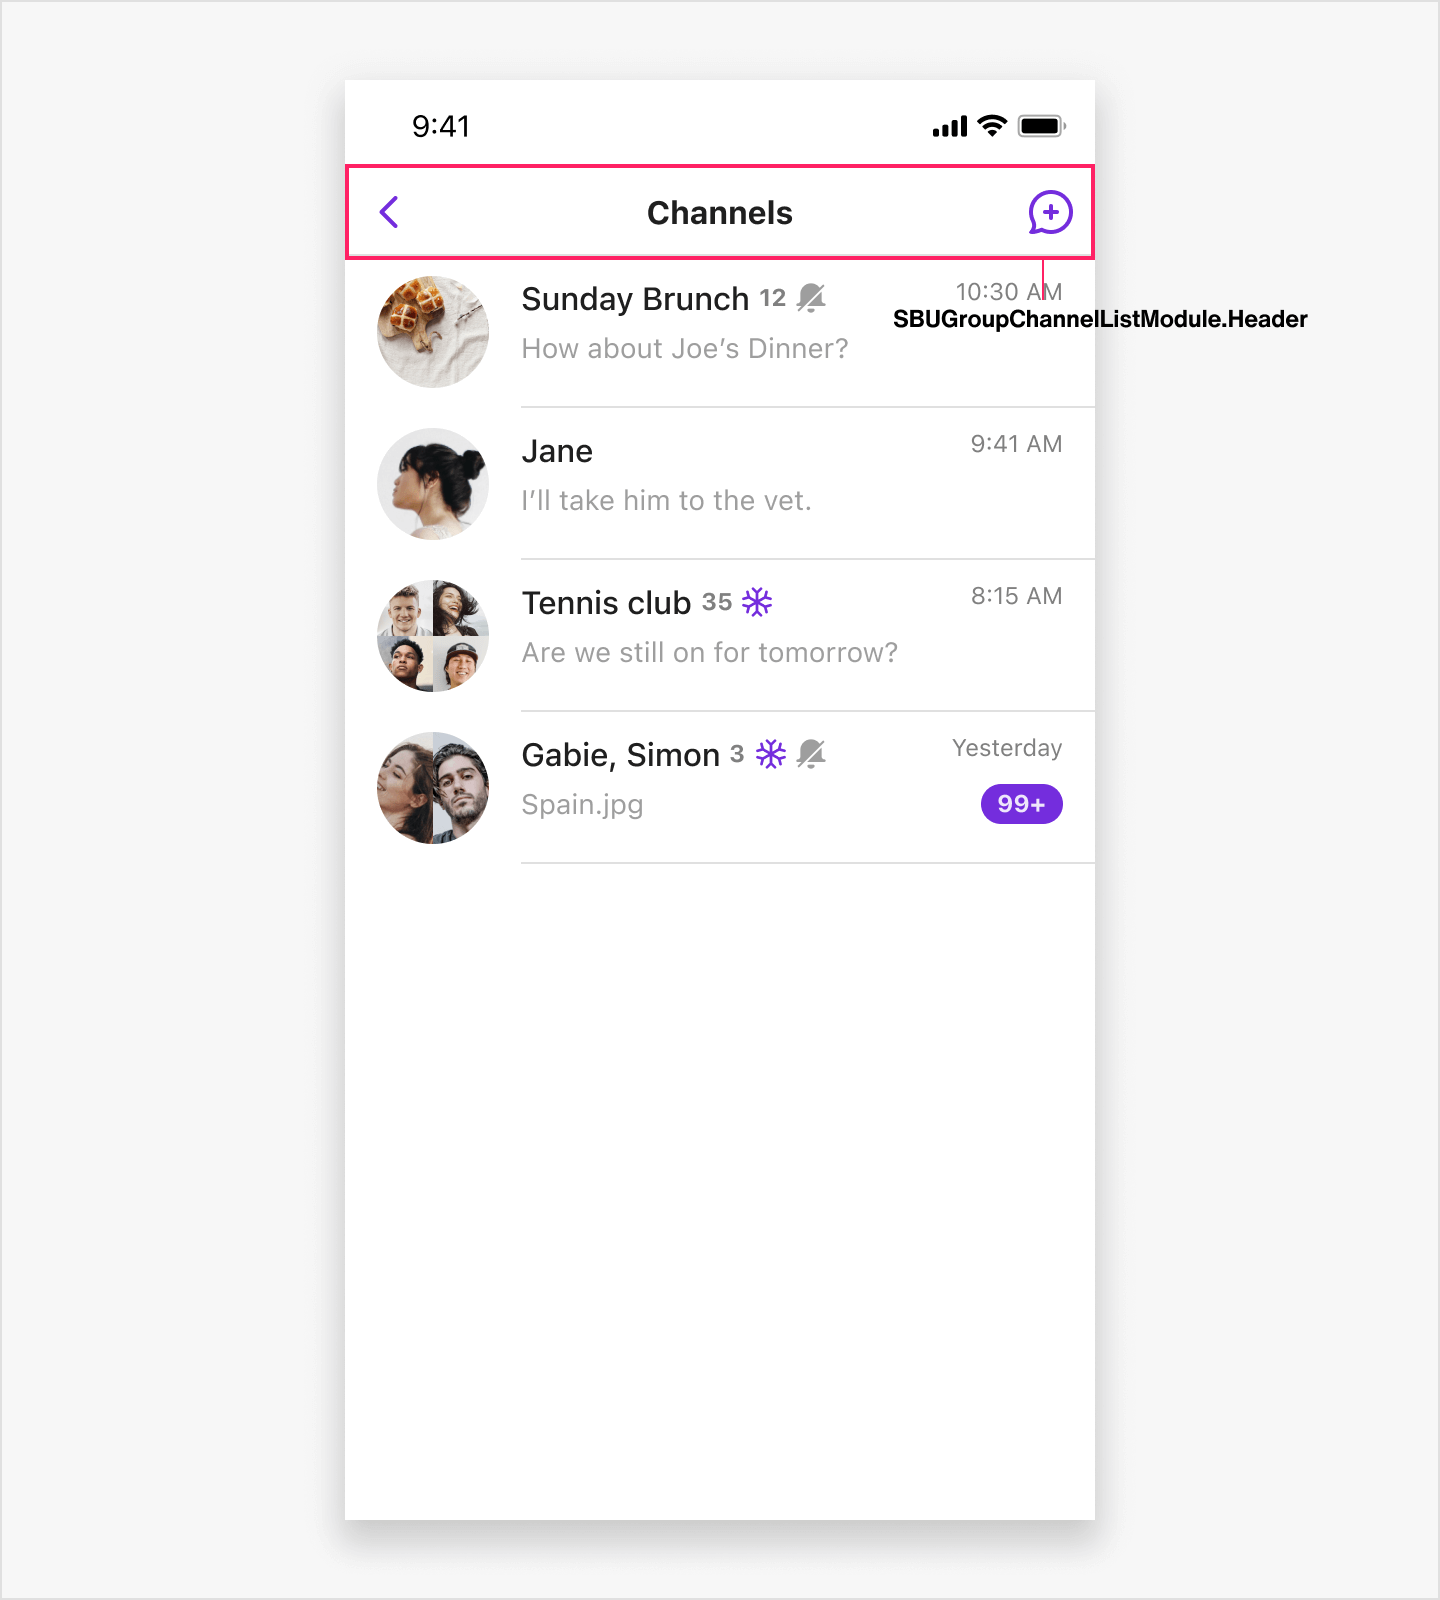 image|a screenshot of a channel list in the client app